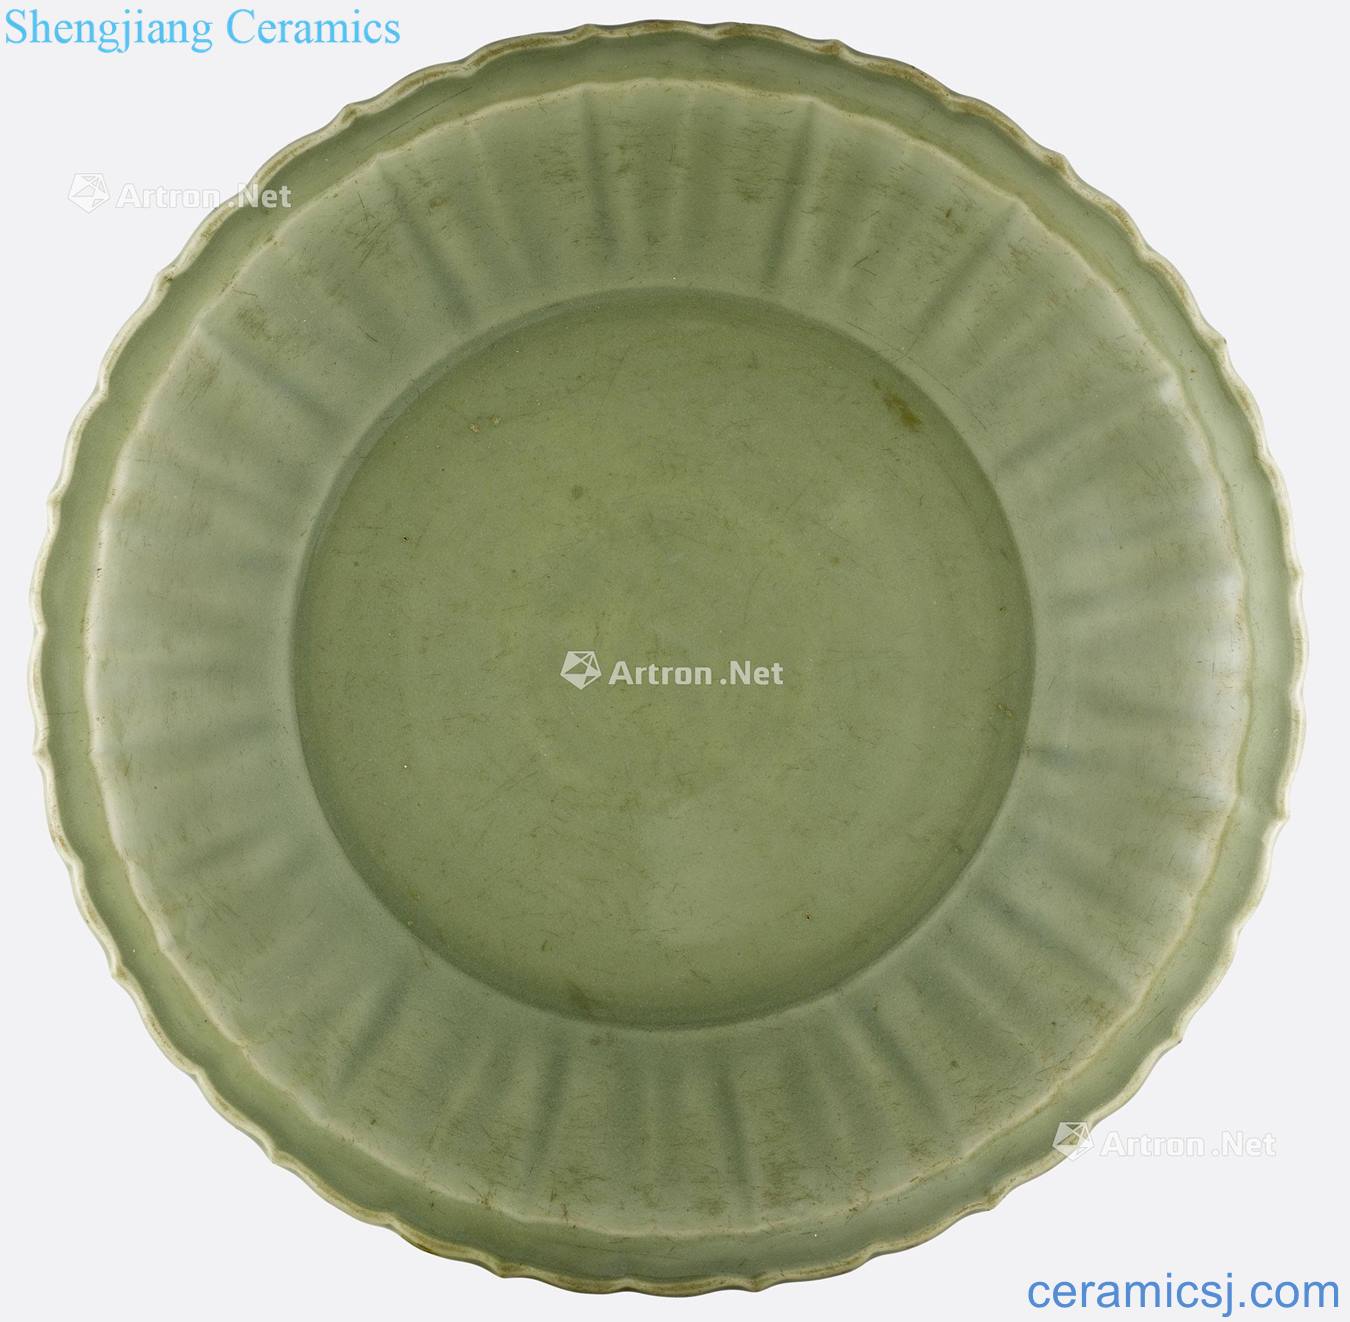 Yuan and early Ming/14 or 15 century Longquan celadon glaze ling mouth album